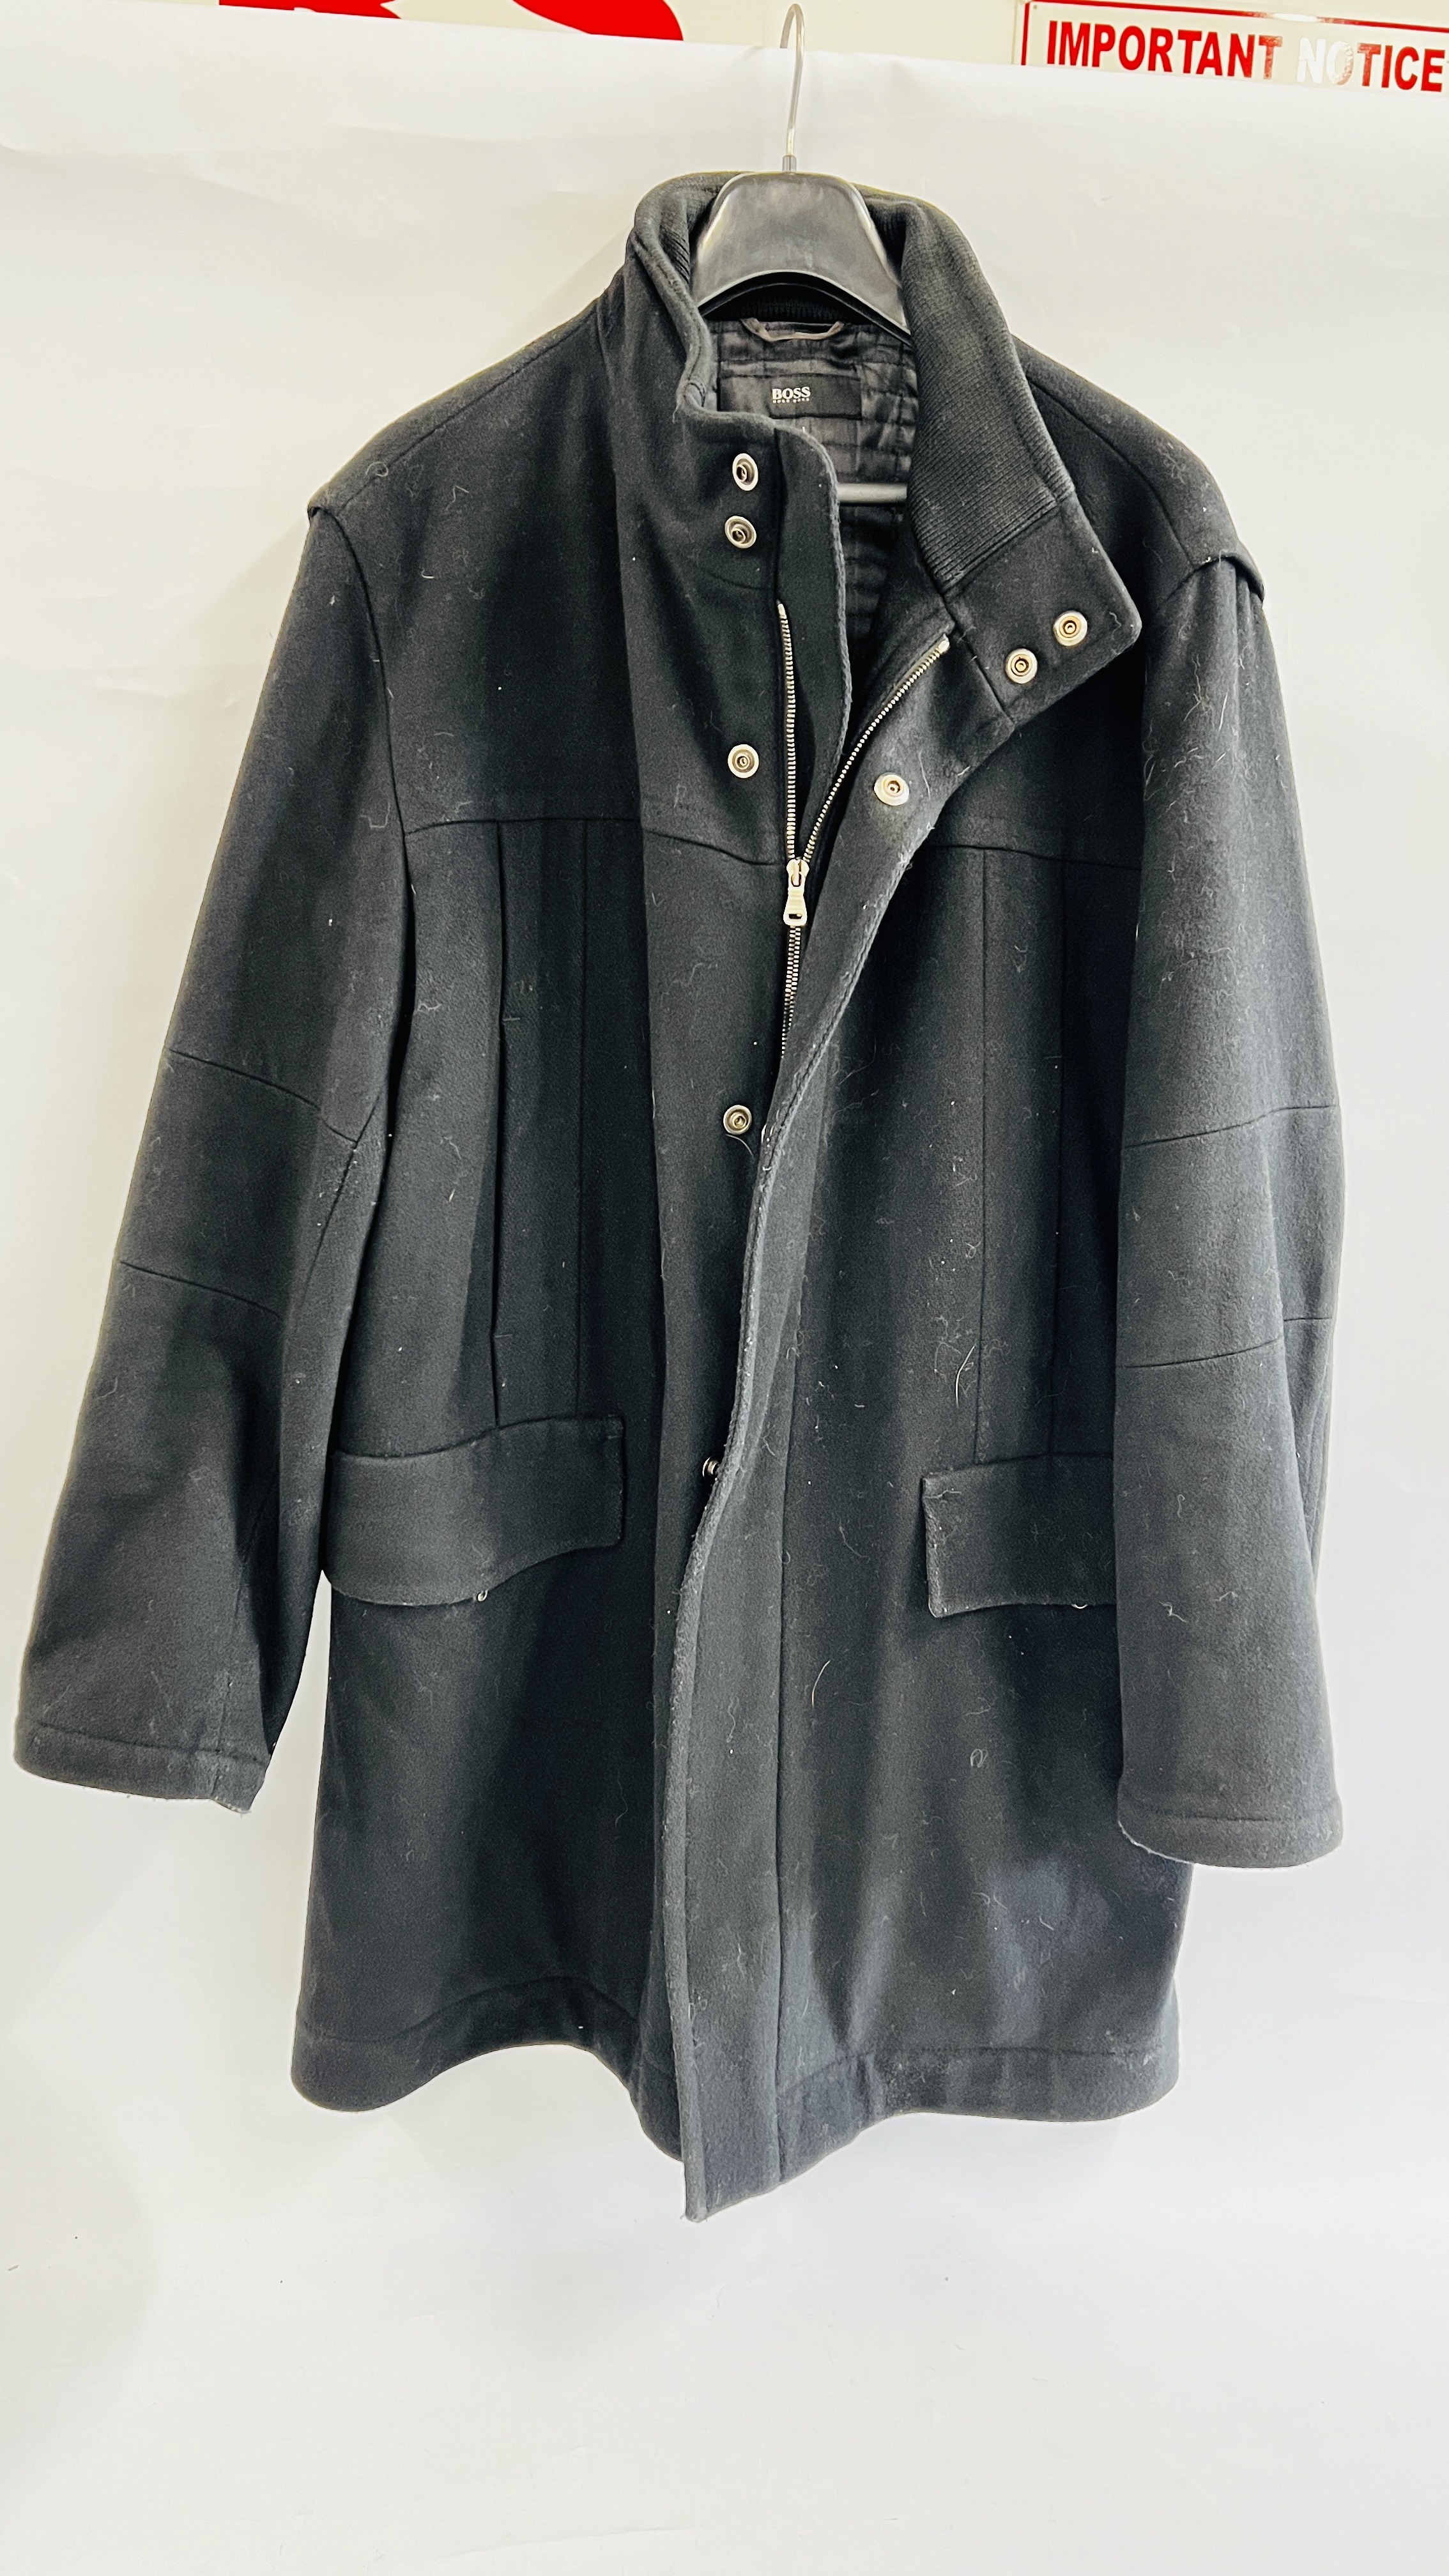 3 GOOD QUALITY GENT'S COATS TO INCLUDE HUGO BOSS BLACK COAT SIZE 54 (80% WOOL), - Image 4 of 7